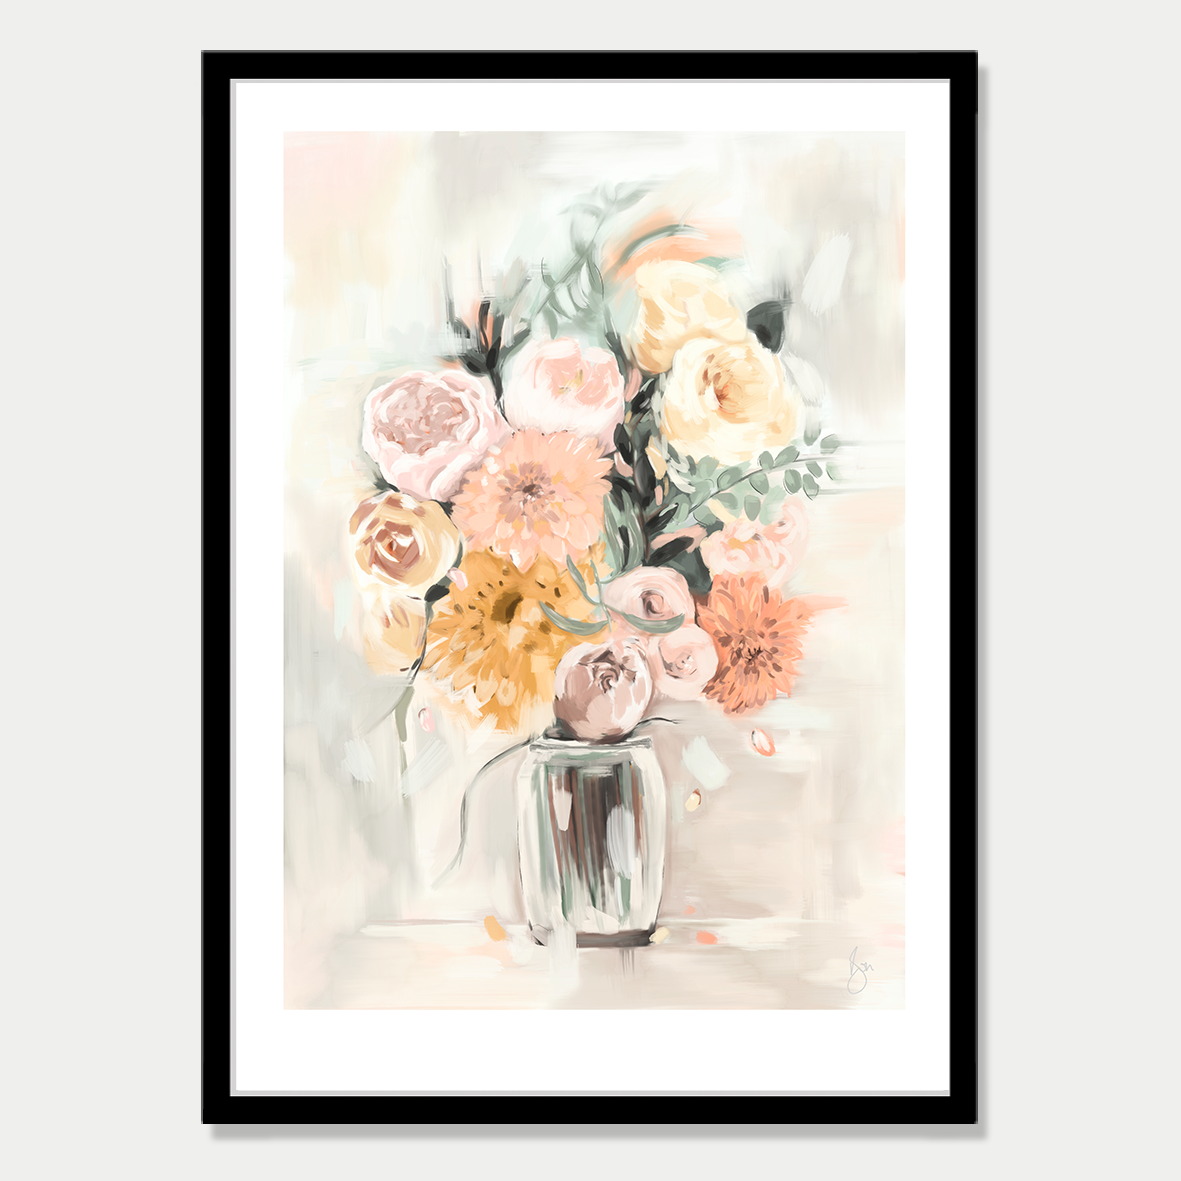 This art print is a still life of a bouquet of flowers in a glass vase, by Bon Jung. Printed in New Zealand by endemicworld and framed in black.